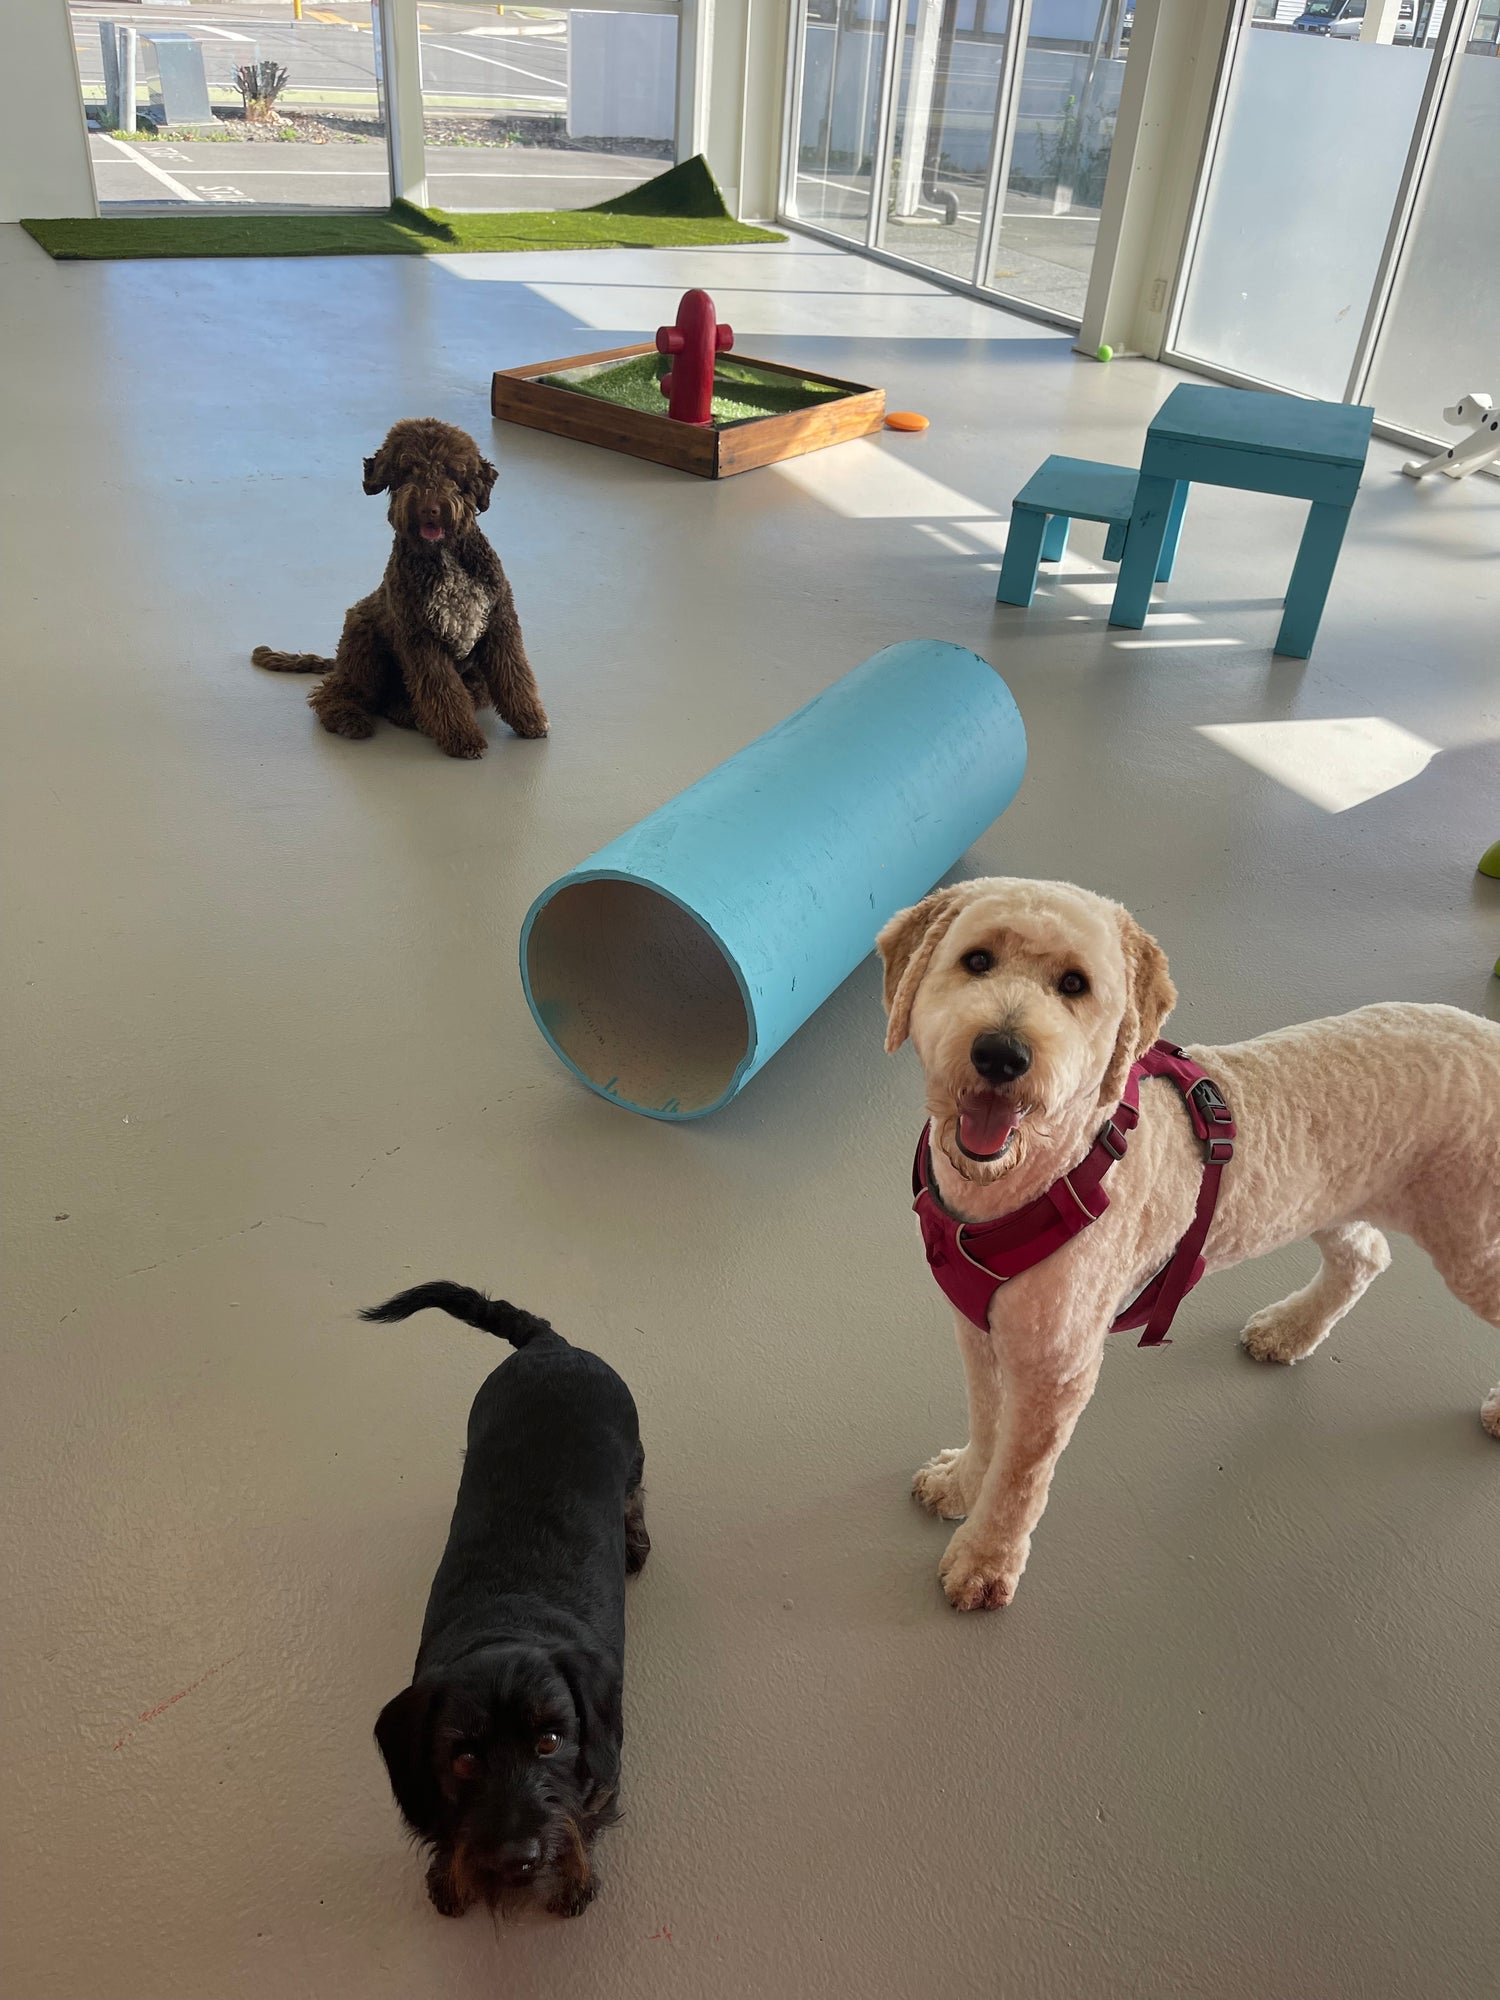 Three Dogs playing in a daycare environment